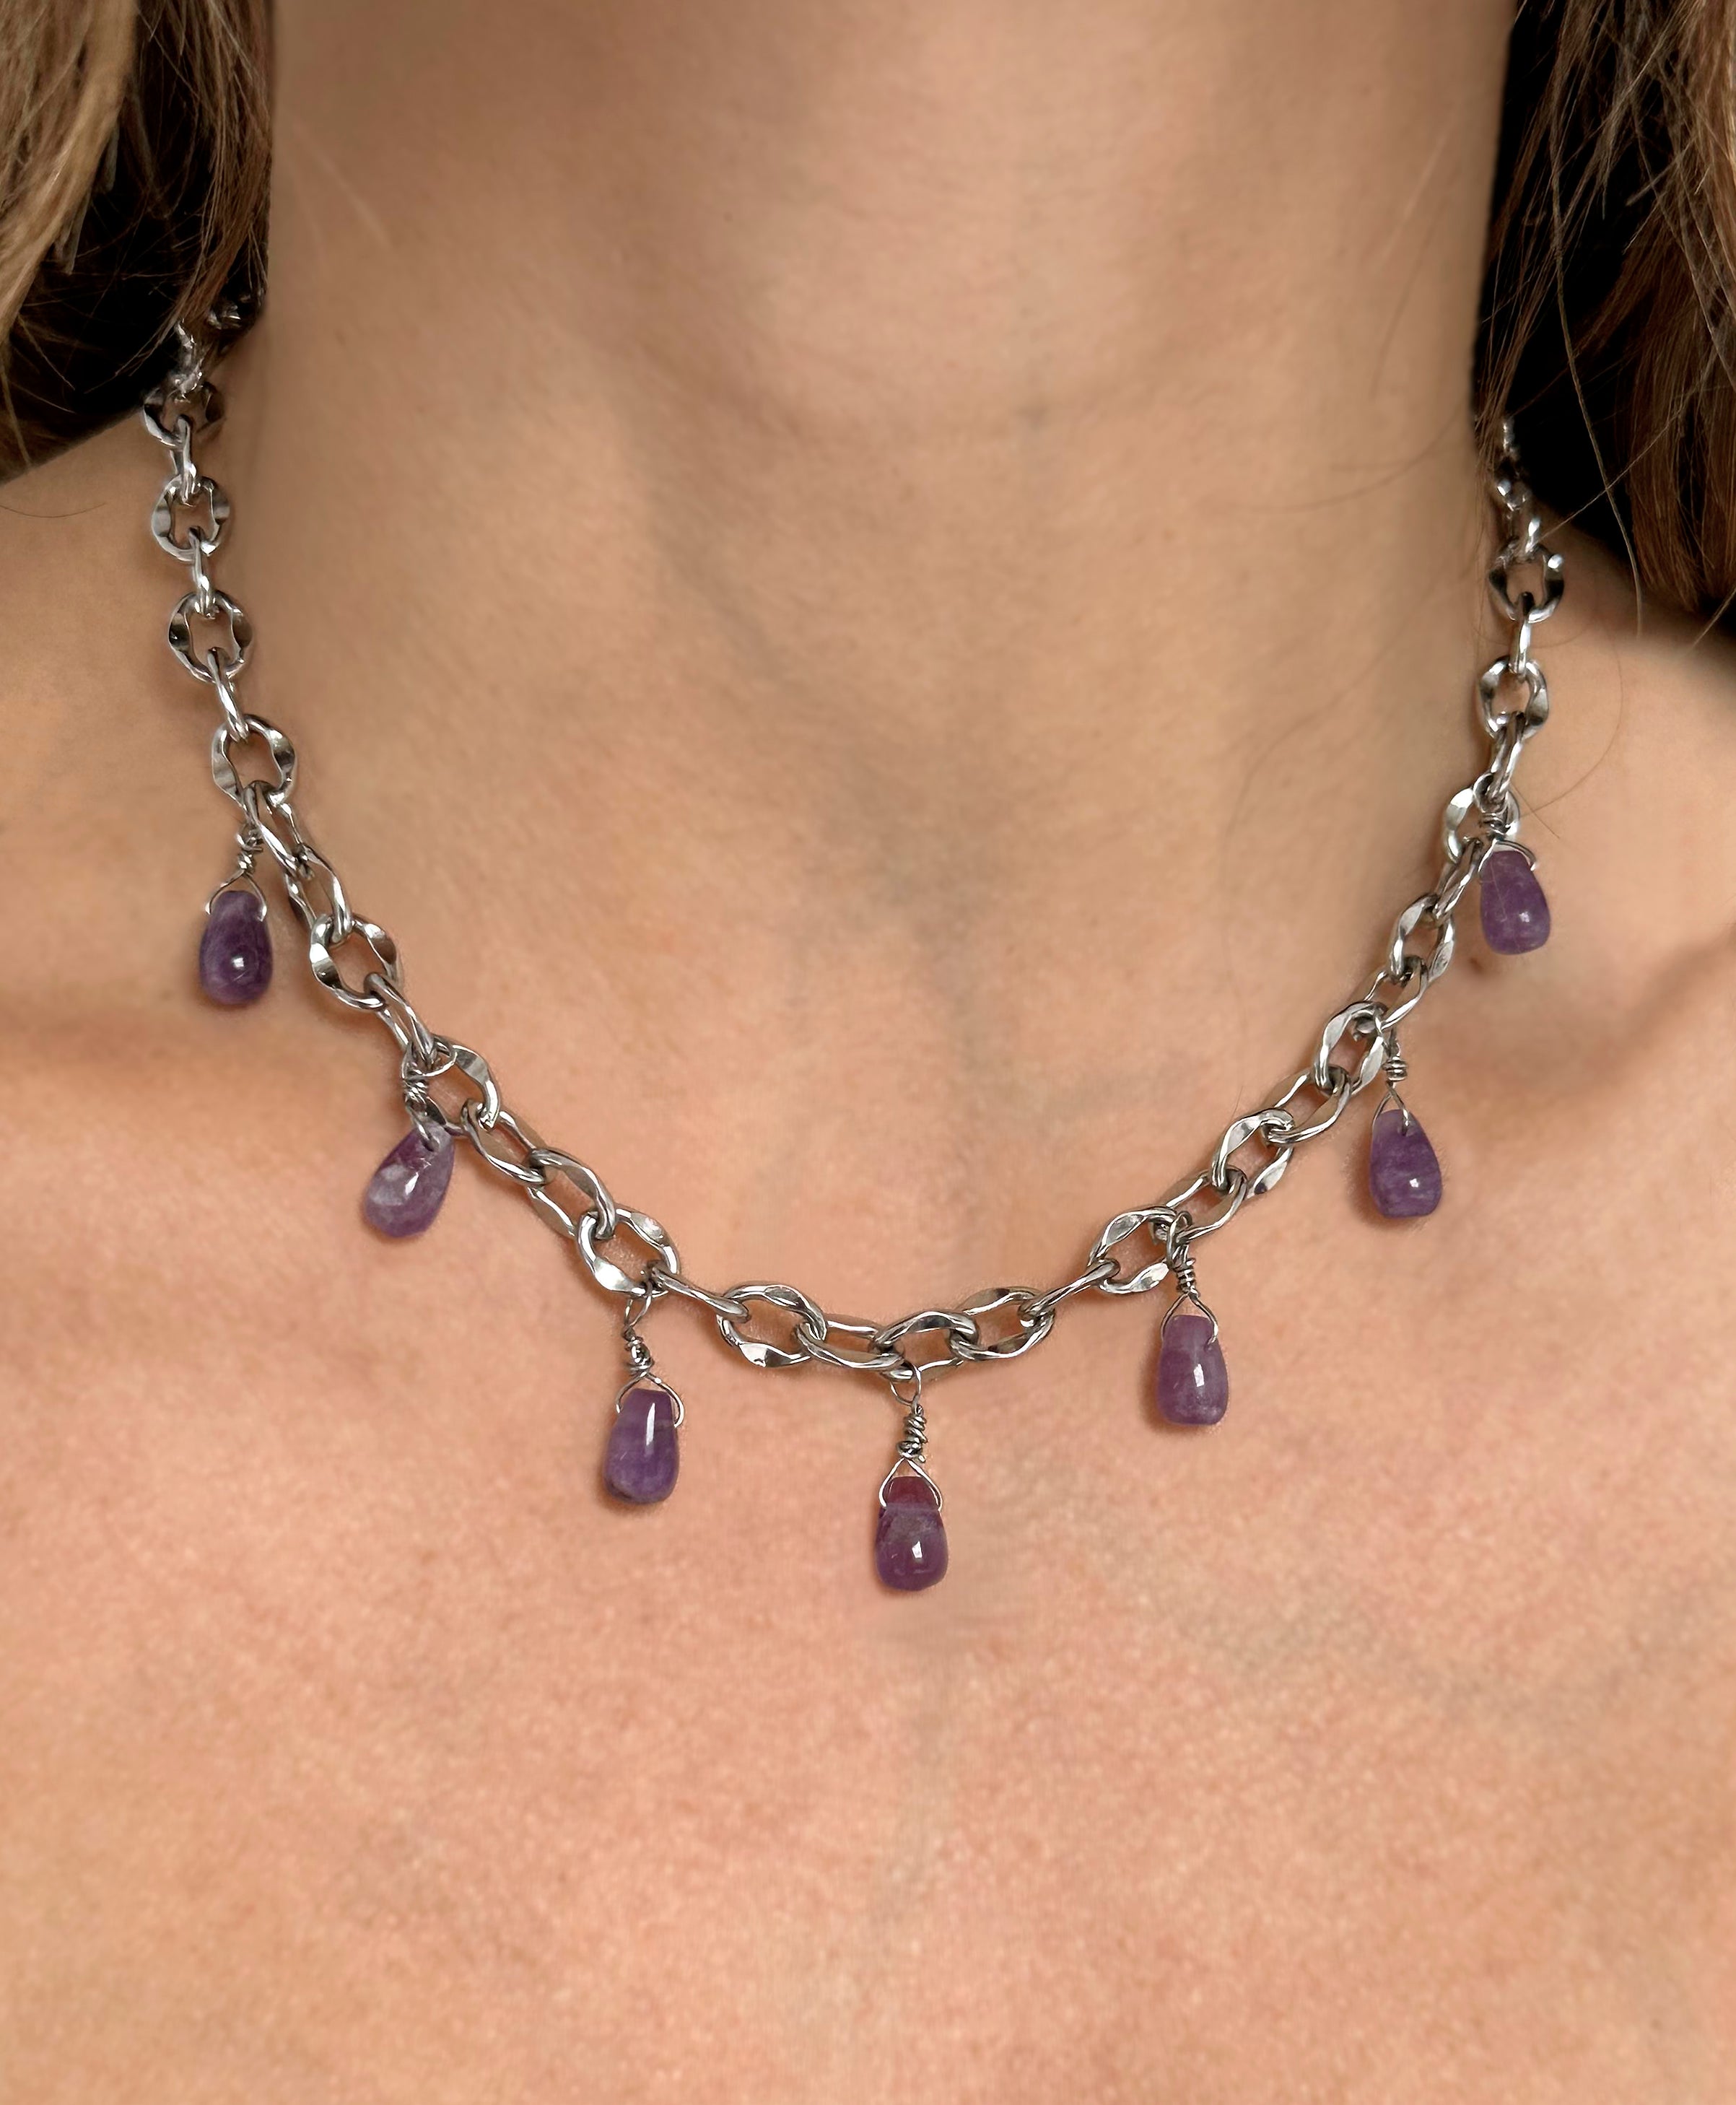 llayers-mens-women-jewelry-silver-stainlesssteel-choker-chain-necklace-unchained-009-amethyst-Brooklyn-New-York-1